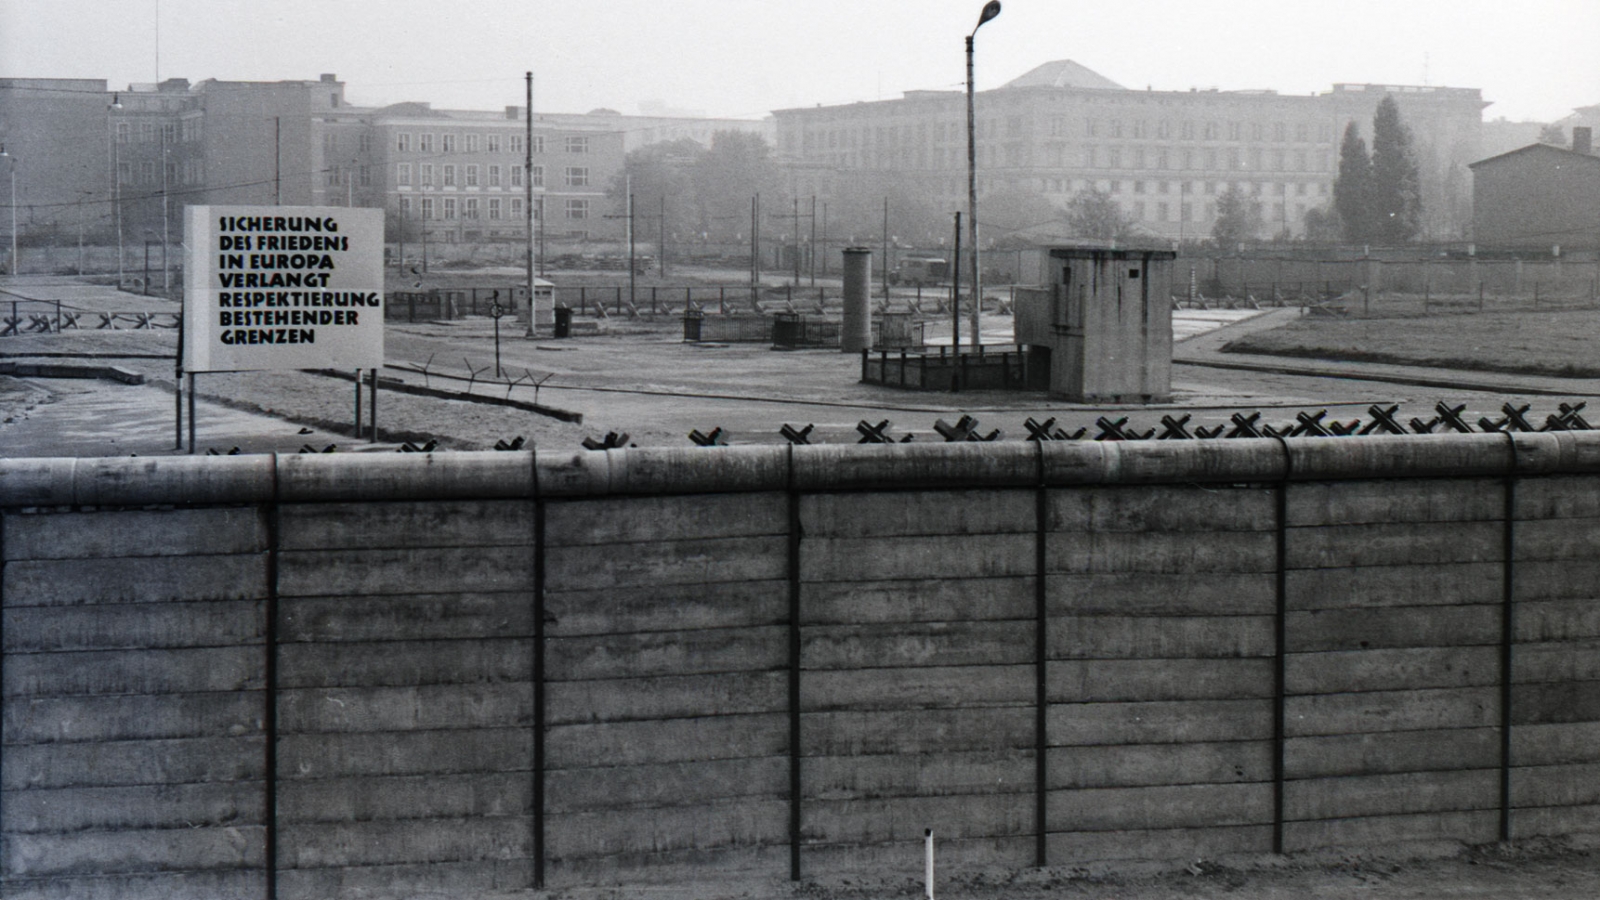 Historical image of the Berlin Wall and the rest of the border fortifications